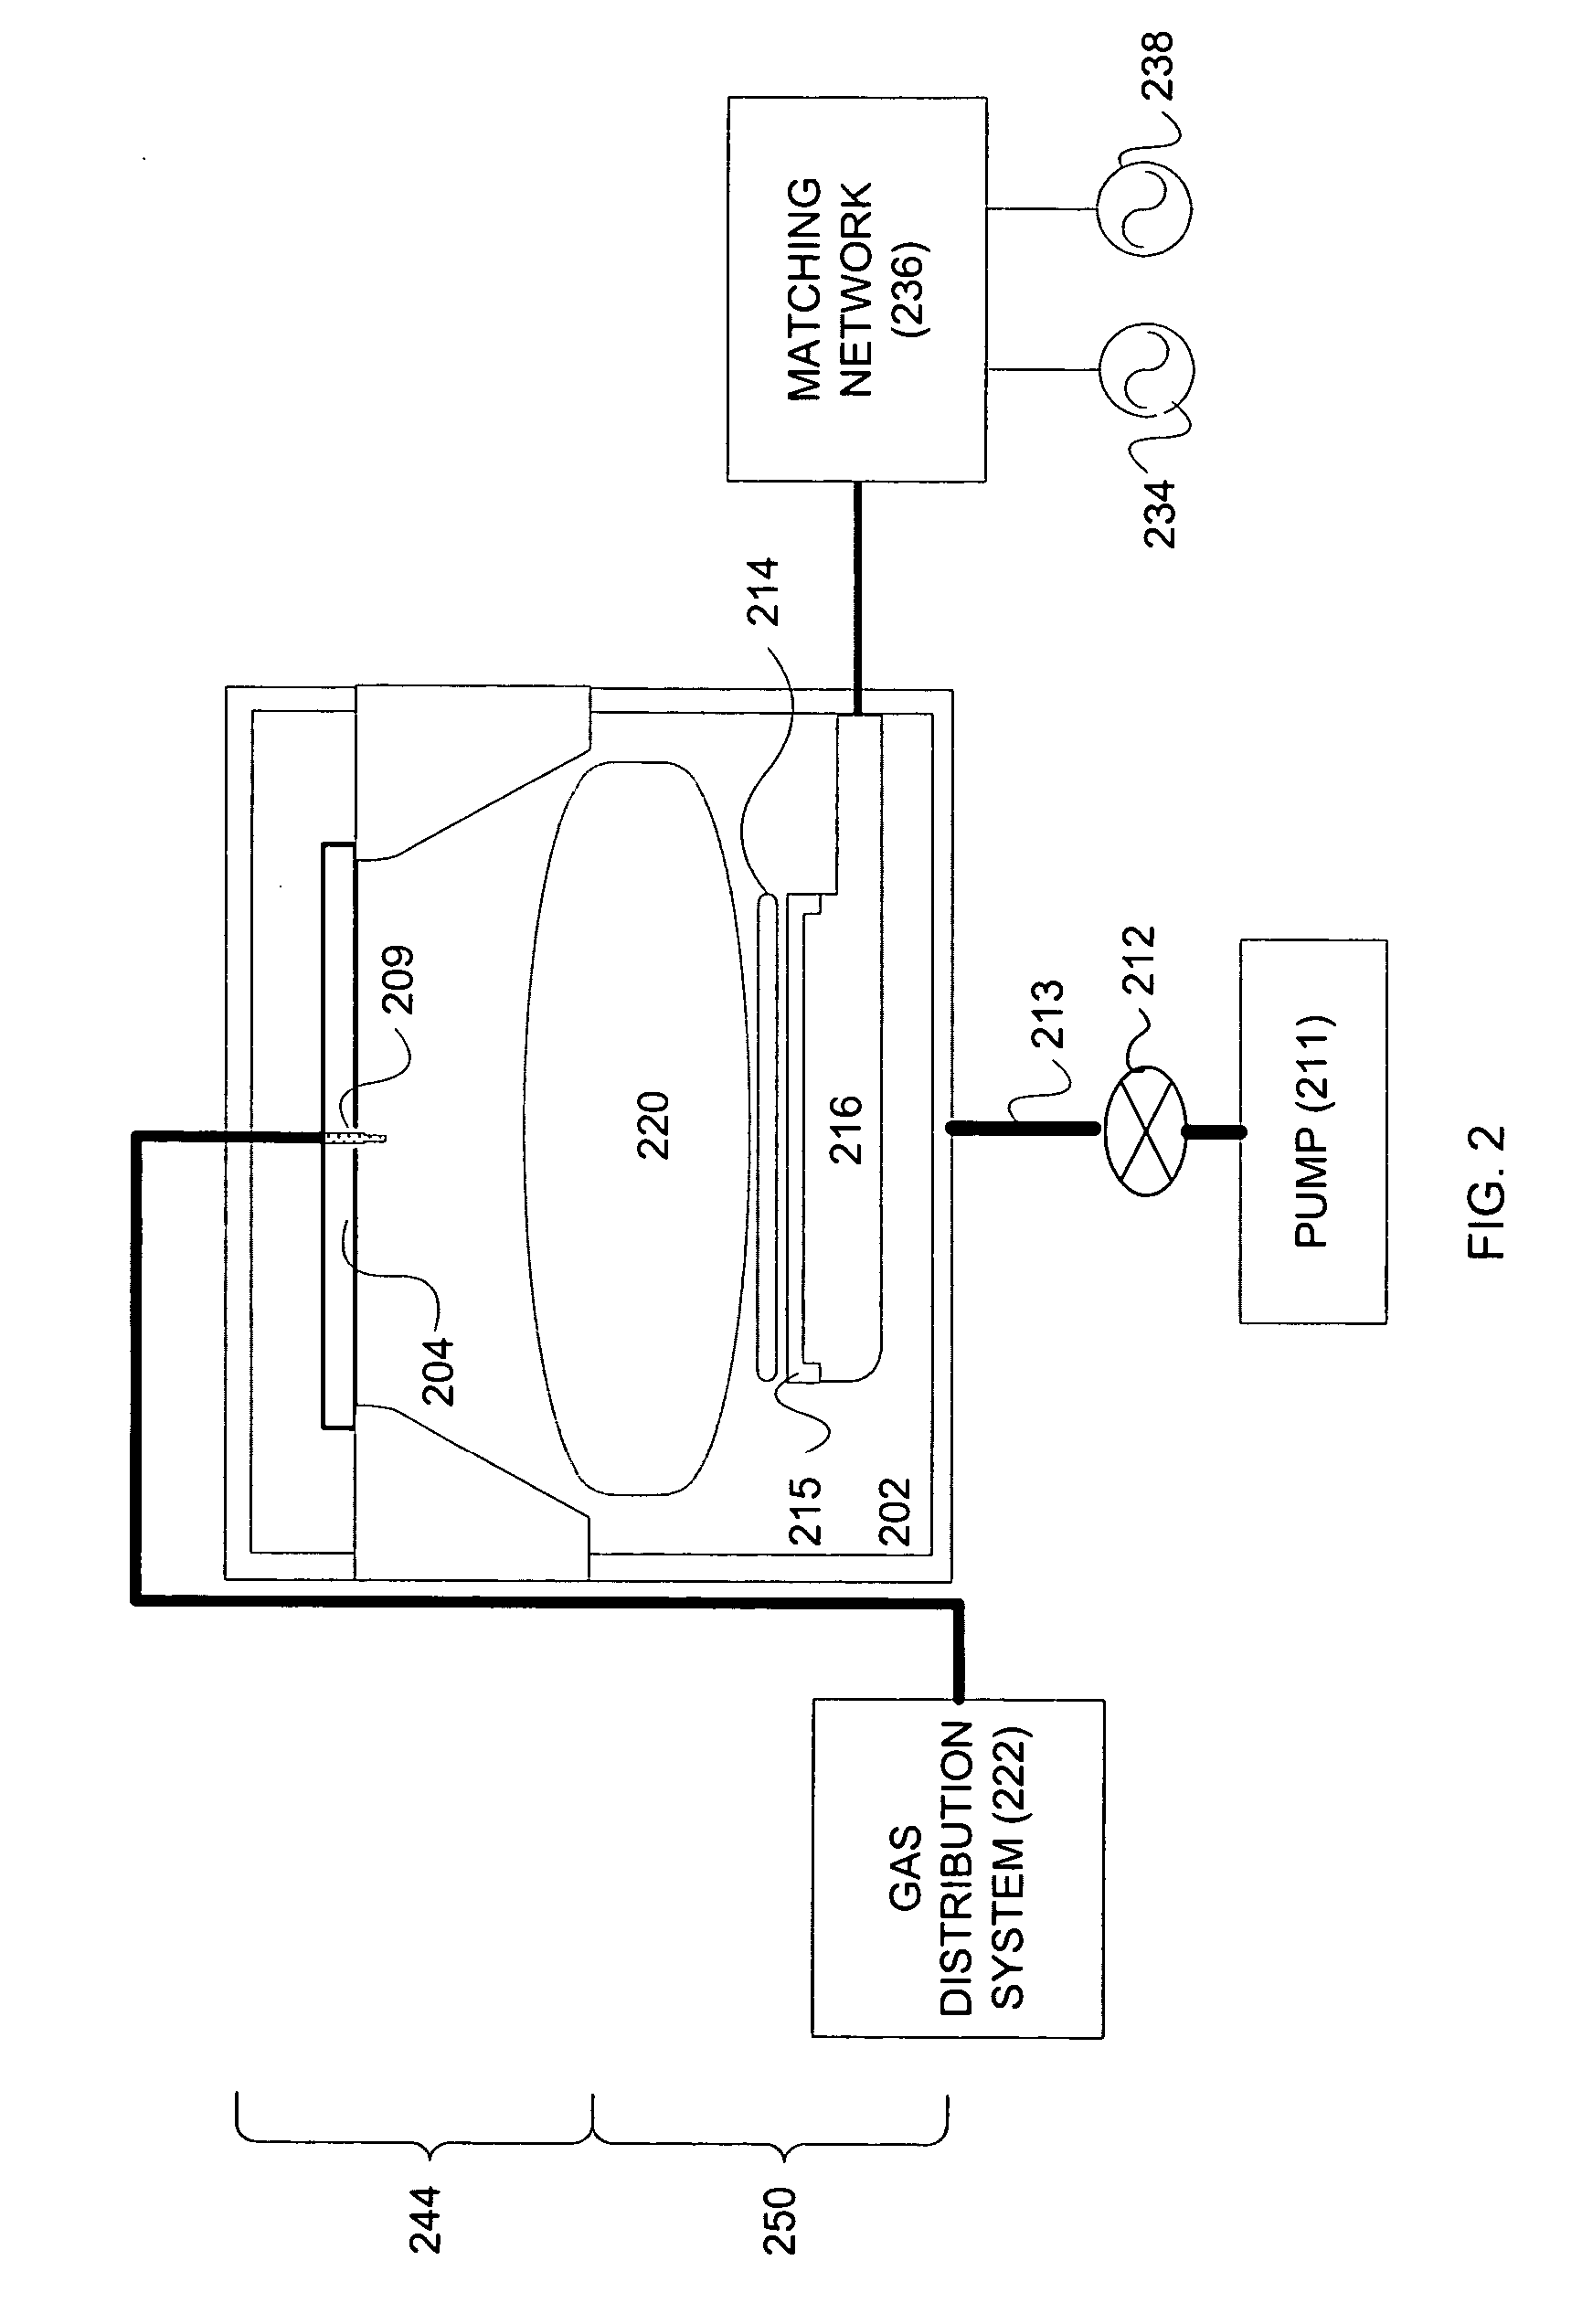 Apparatus for servicing a plasma processing system with a robot